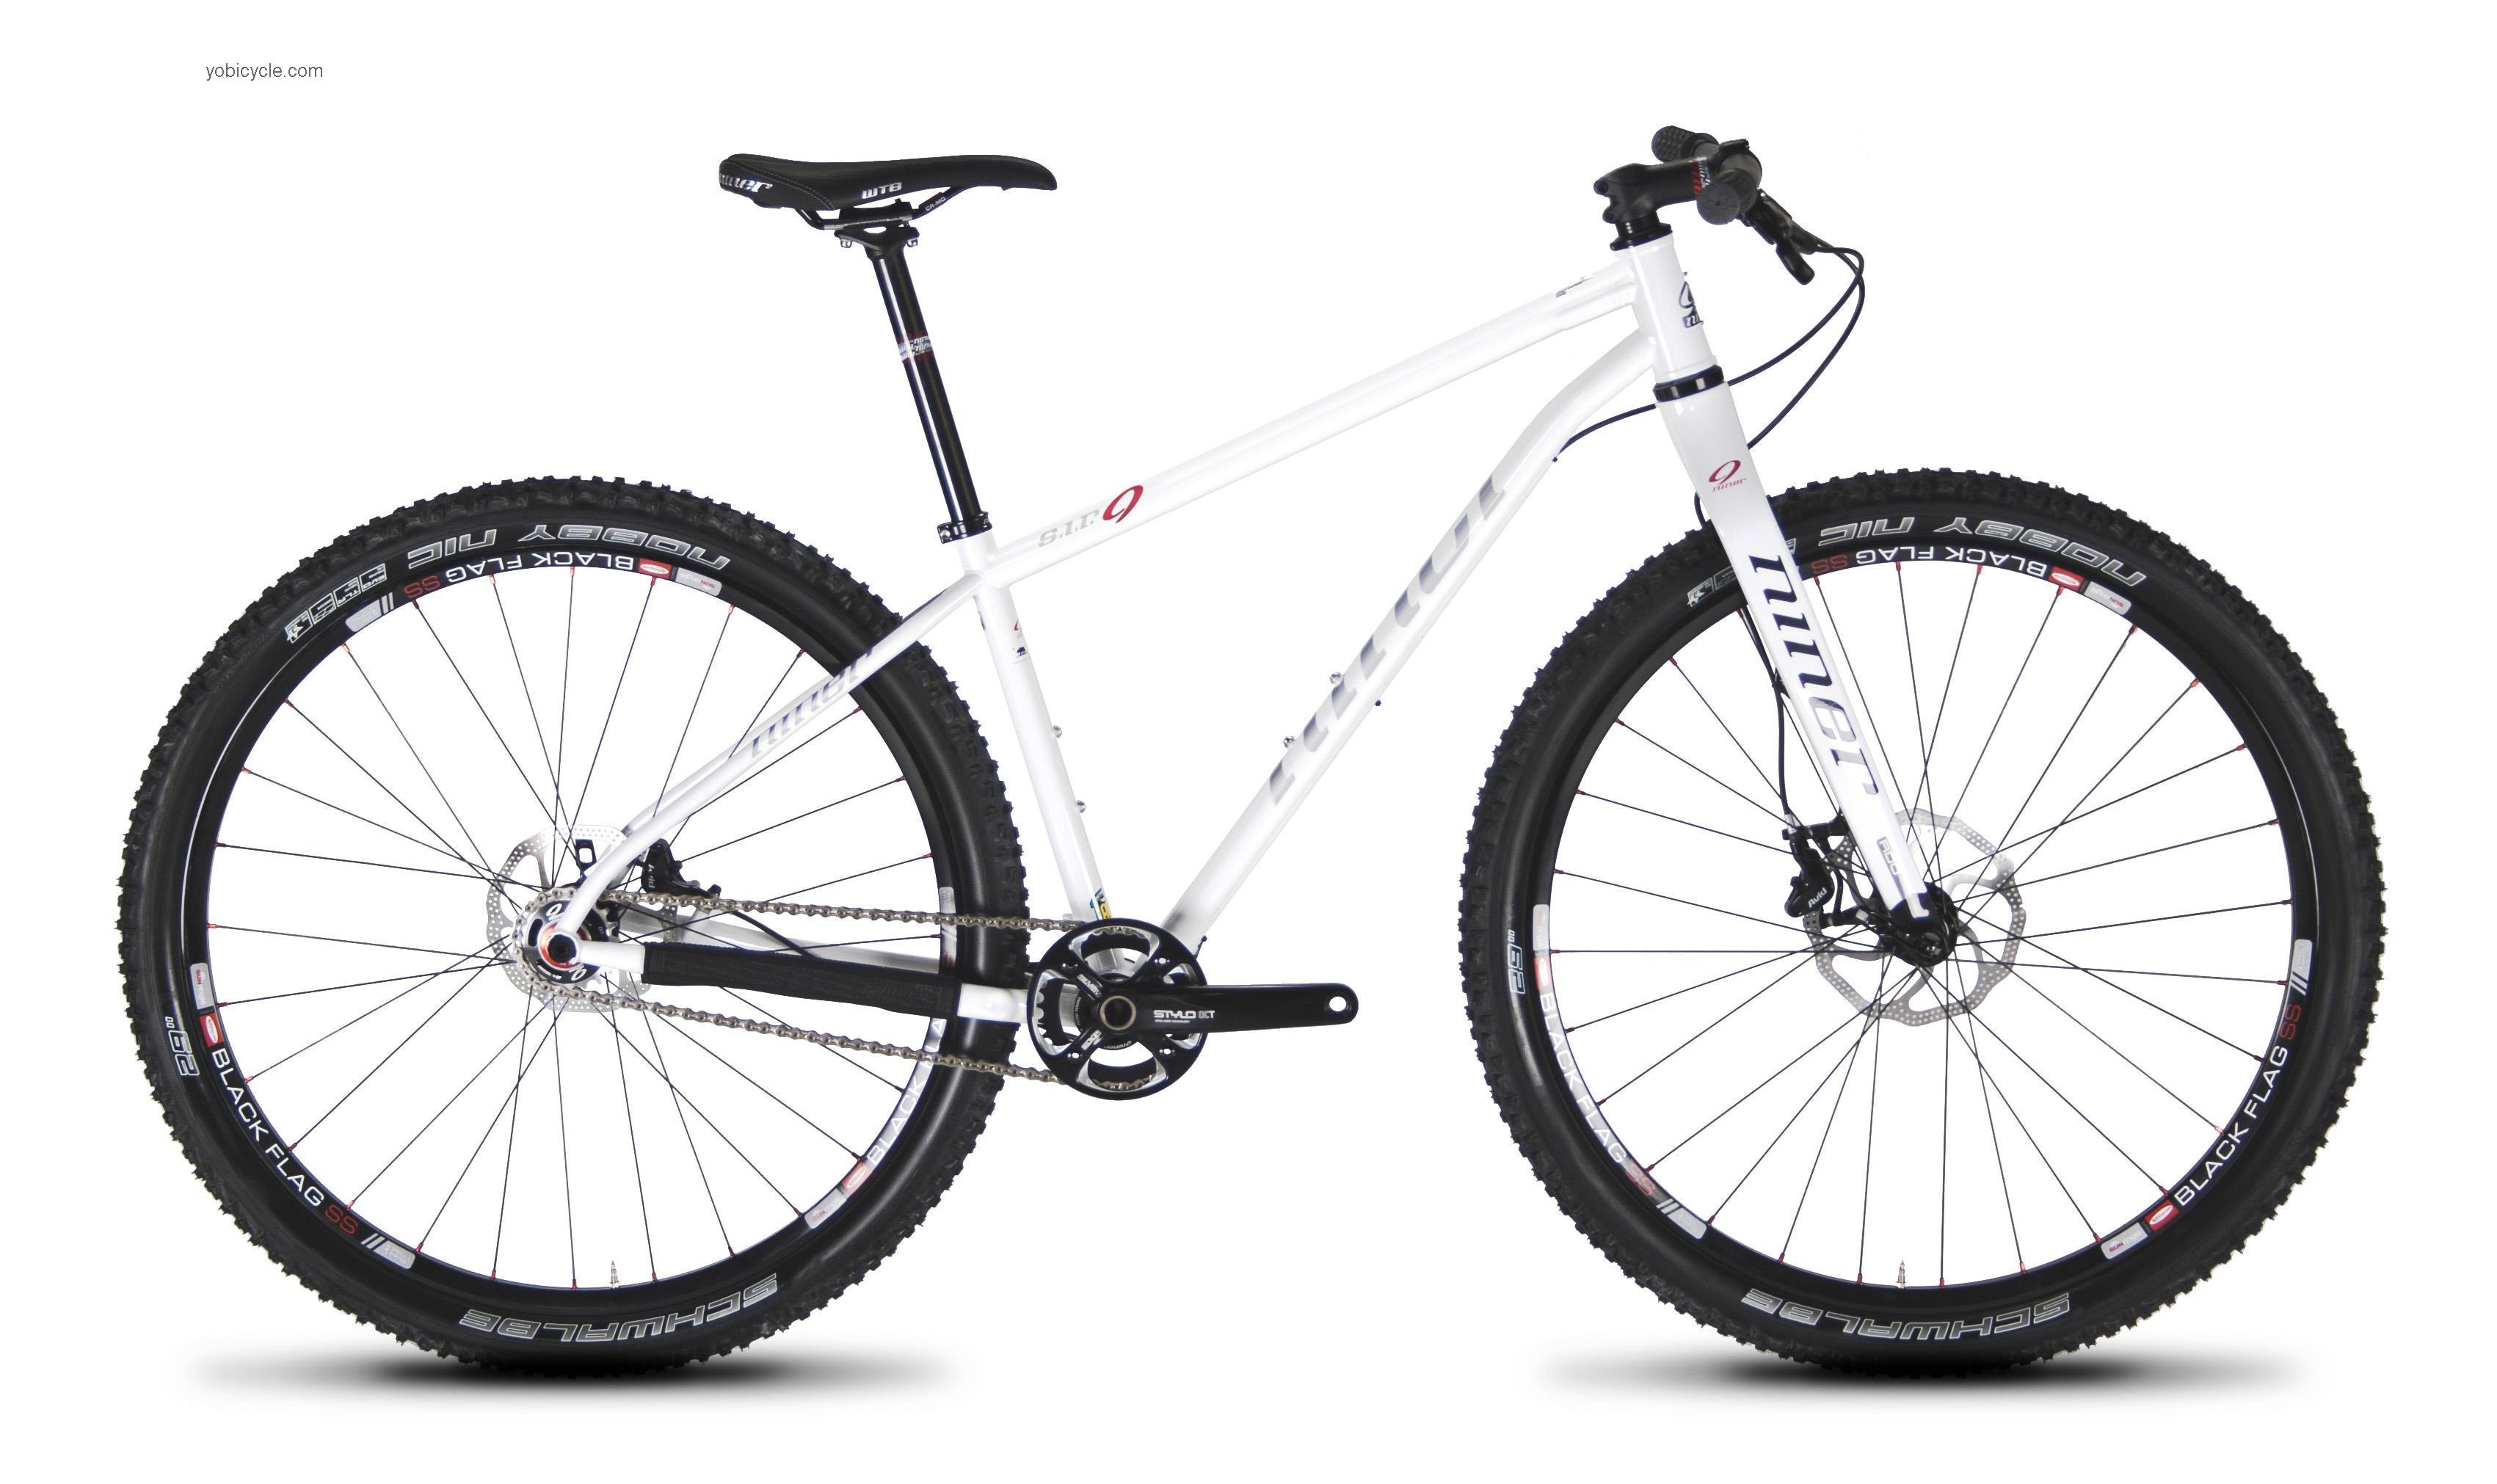 Niner S.I.R. 9 competitors and comparison tool online specs and performance